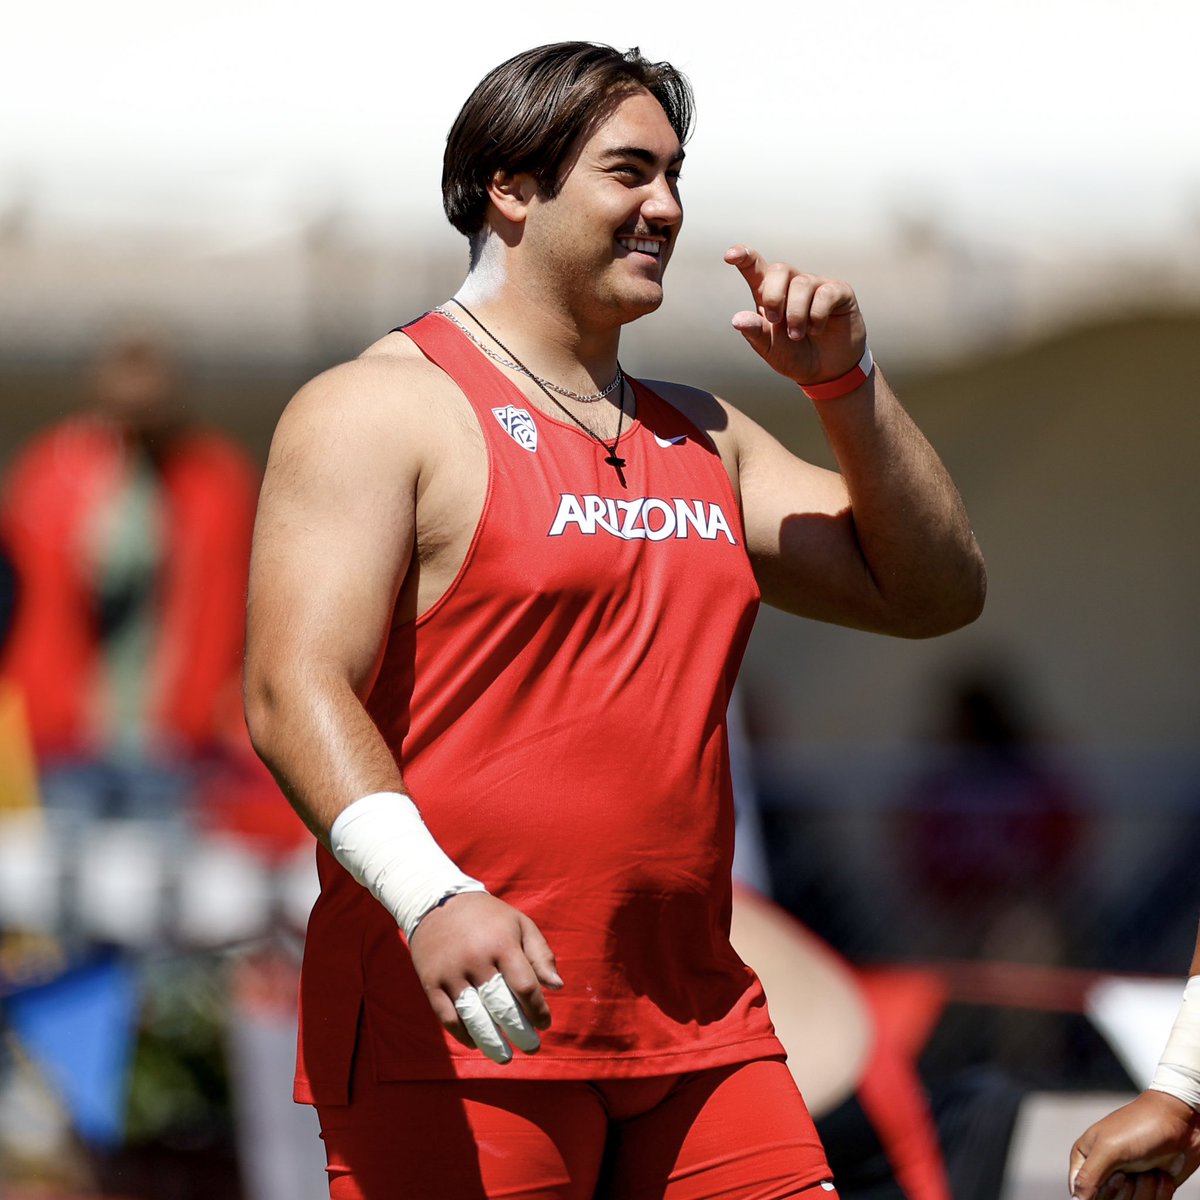 𝐒𝐇𝐎𝐓 𝐏𝐔𝐓 𝐅𝐈𝐍𝐀𝐋 Tyler Michelini finishes fifth in the men’s shot put with a throw of 57-11.25 (17.66m)! #BearDown | #BeLezoLike